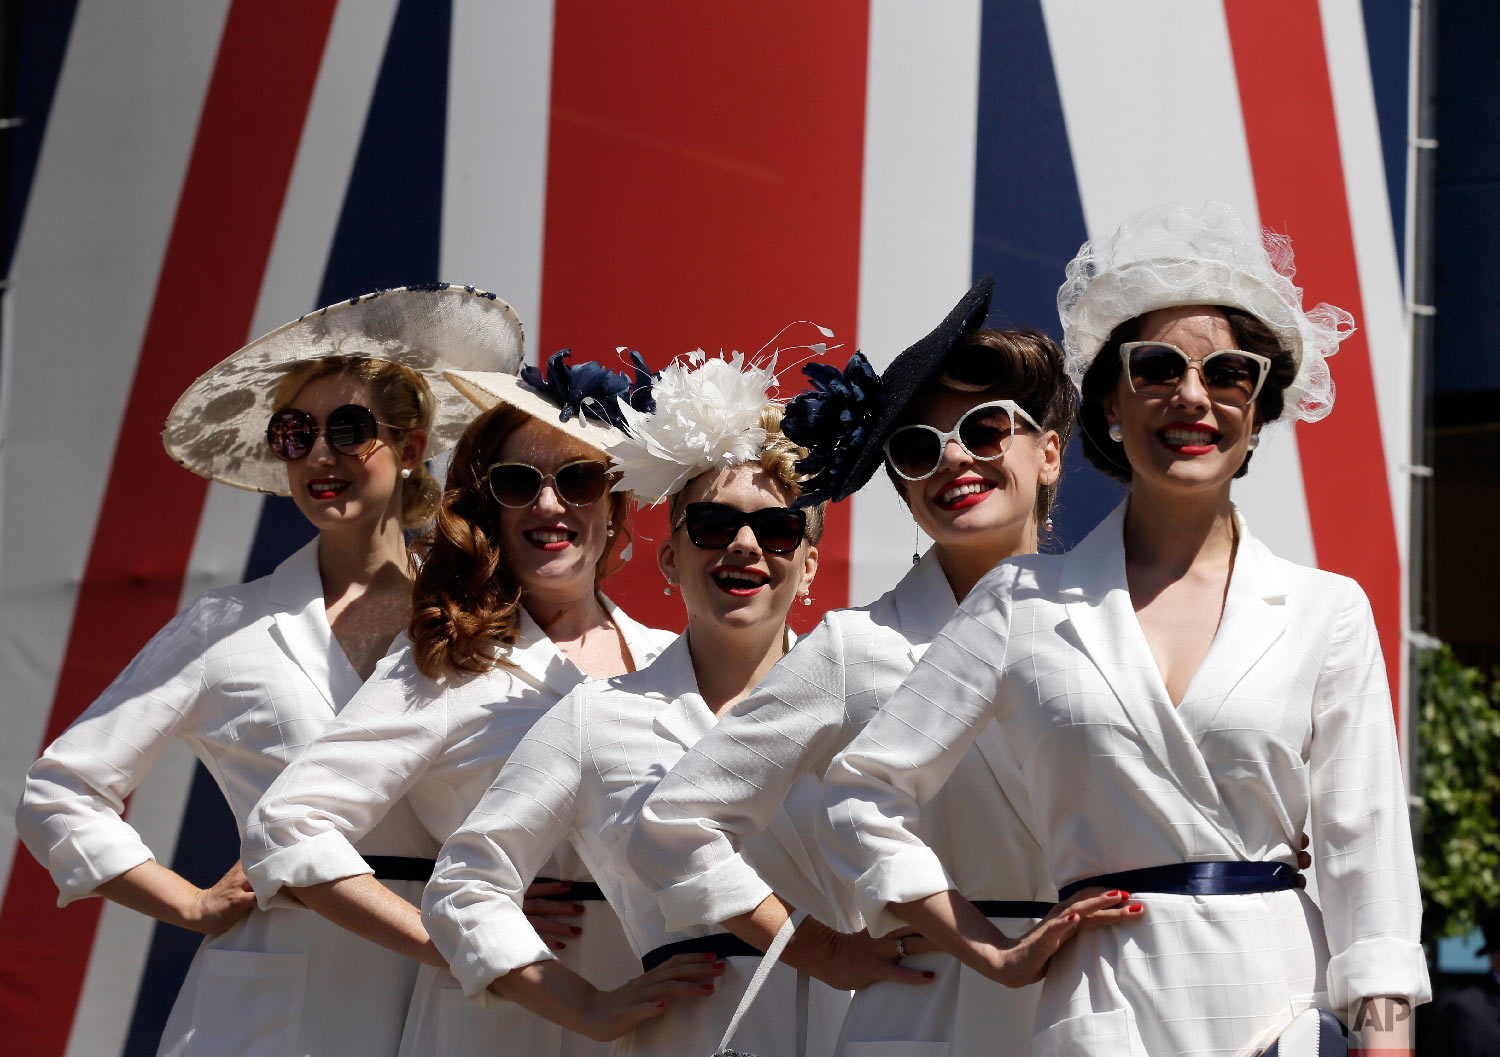  The Tootsie Rollers pose for the media on the third day of the Royal Ascot horse race meeting, which is traditionally known as Ladies Day, in Ascot, England Thursday, June 21, 2018. (AP Photo/Tim Ireland) 